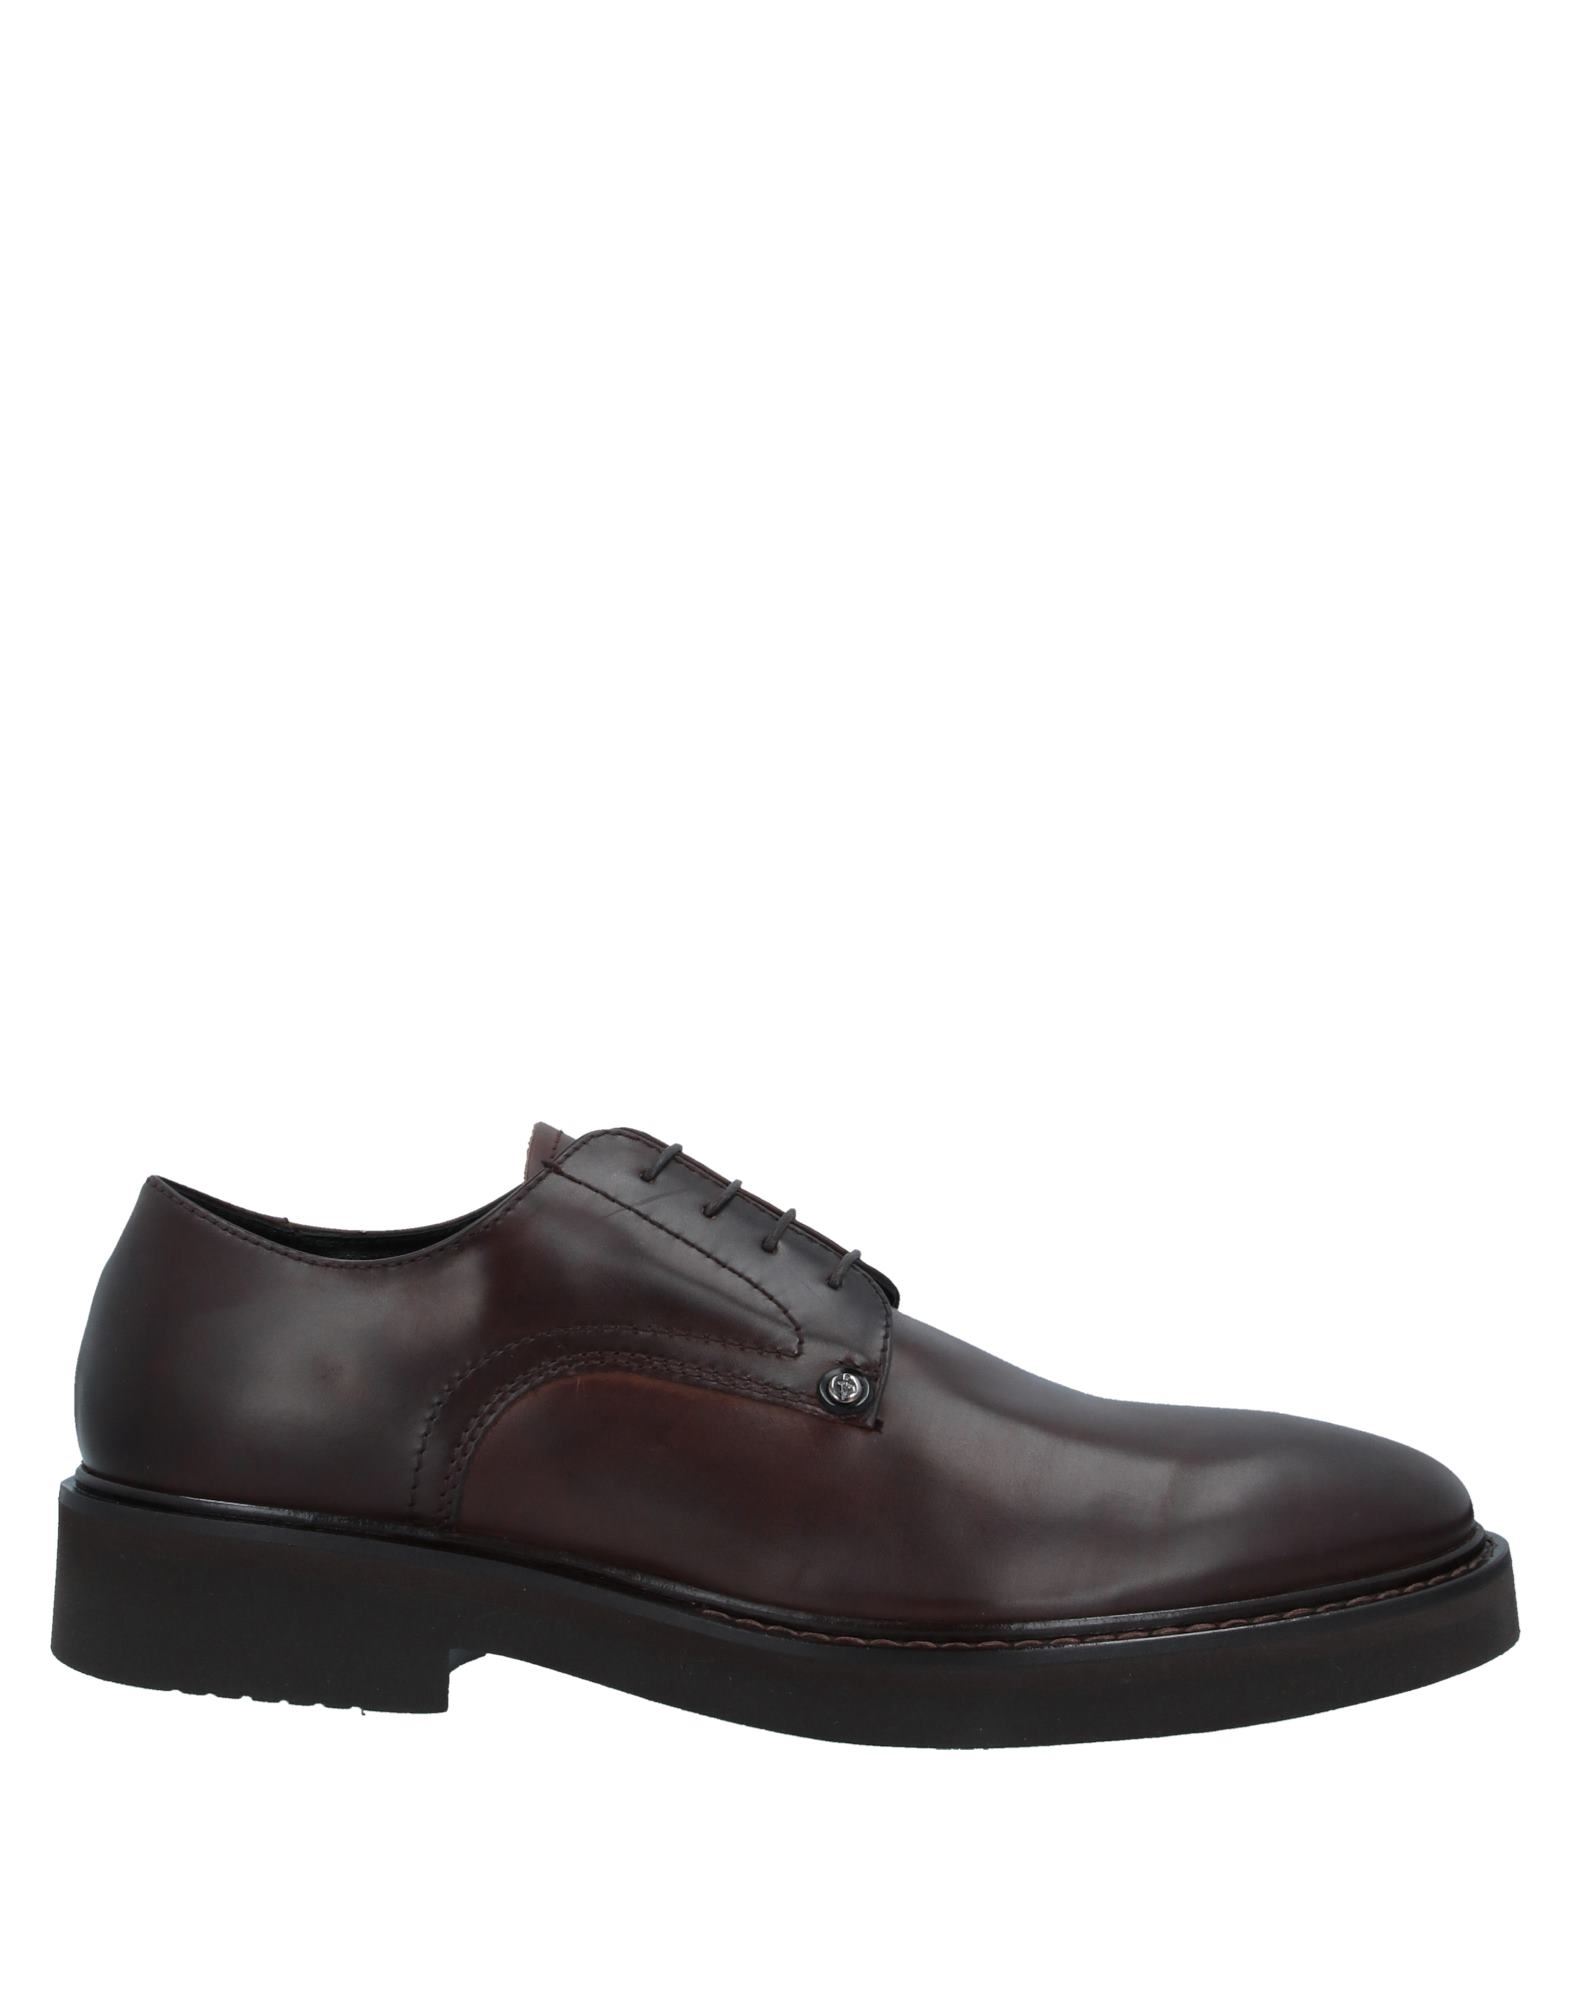 Paciotti 308 Madison Nyc Lace-up Shoes In Dark Brown